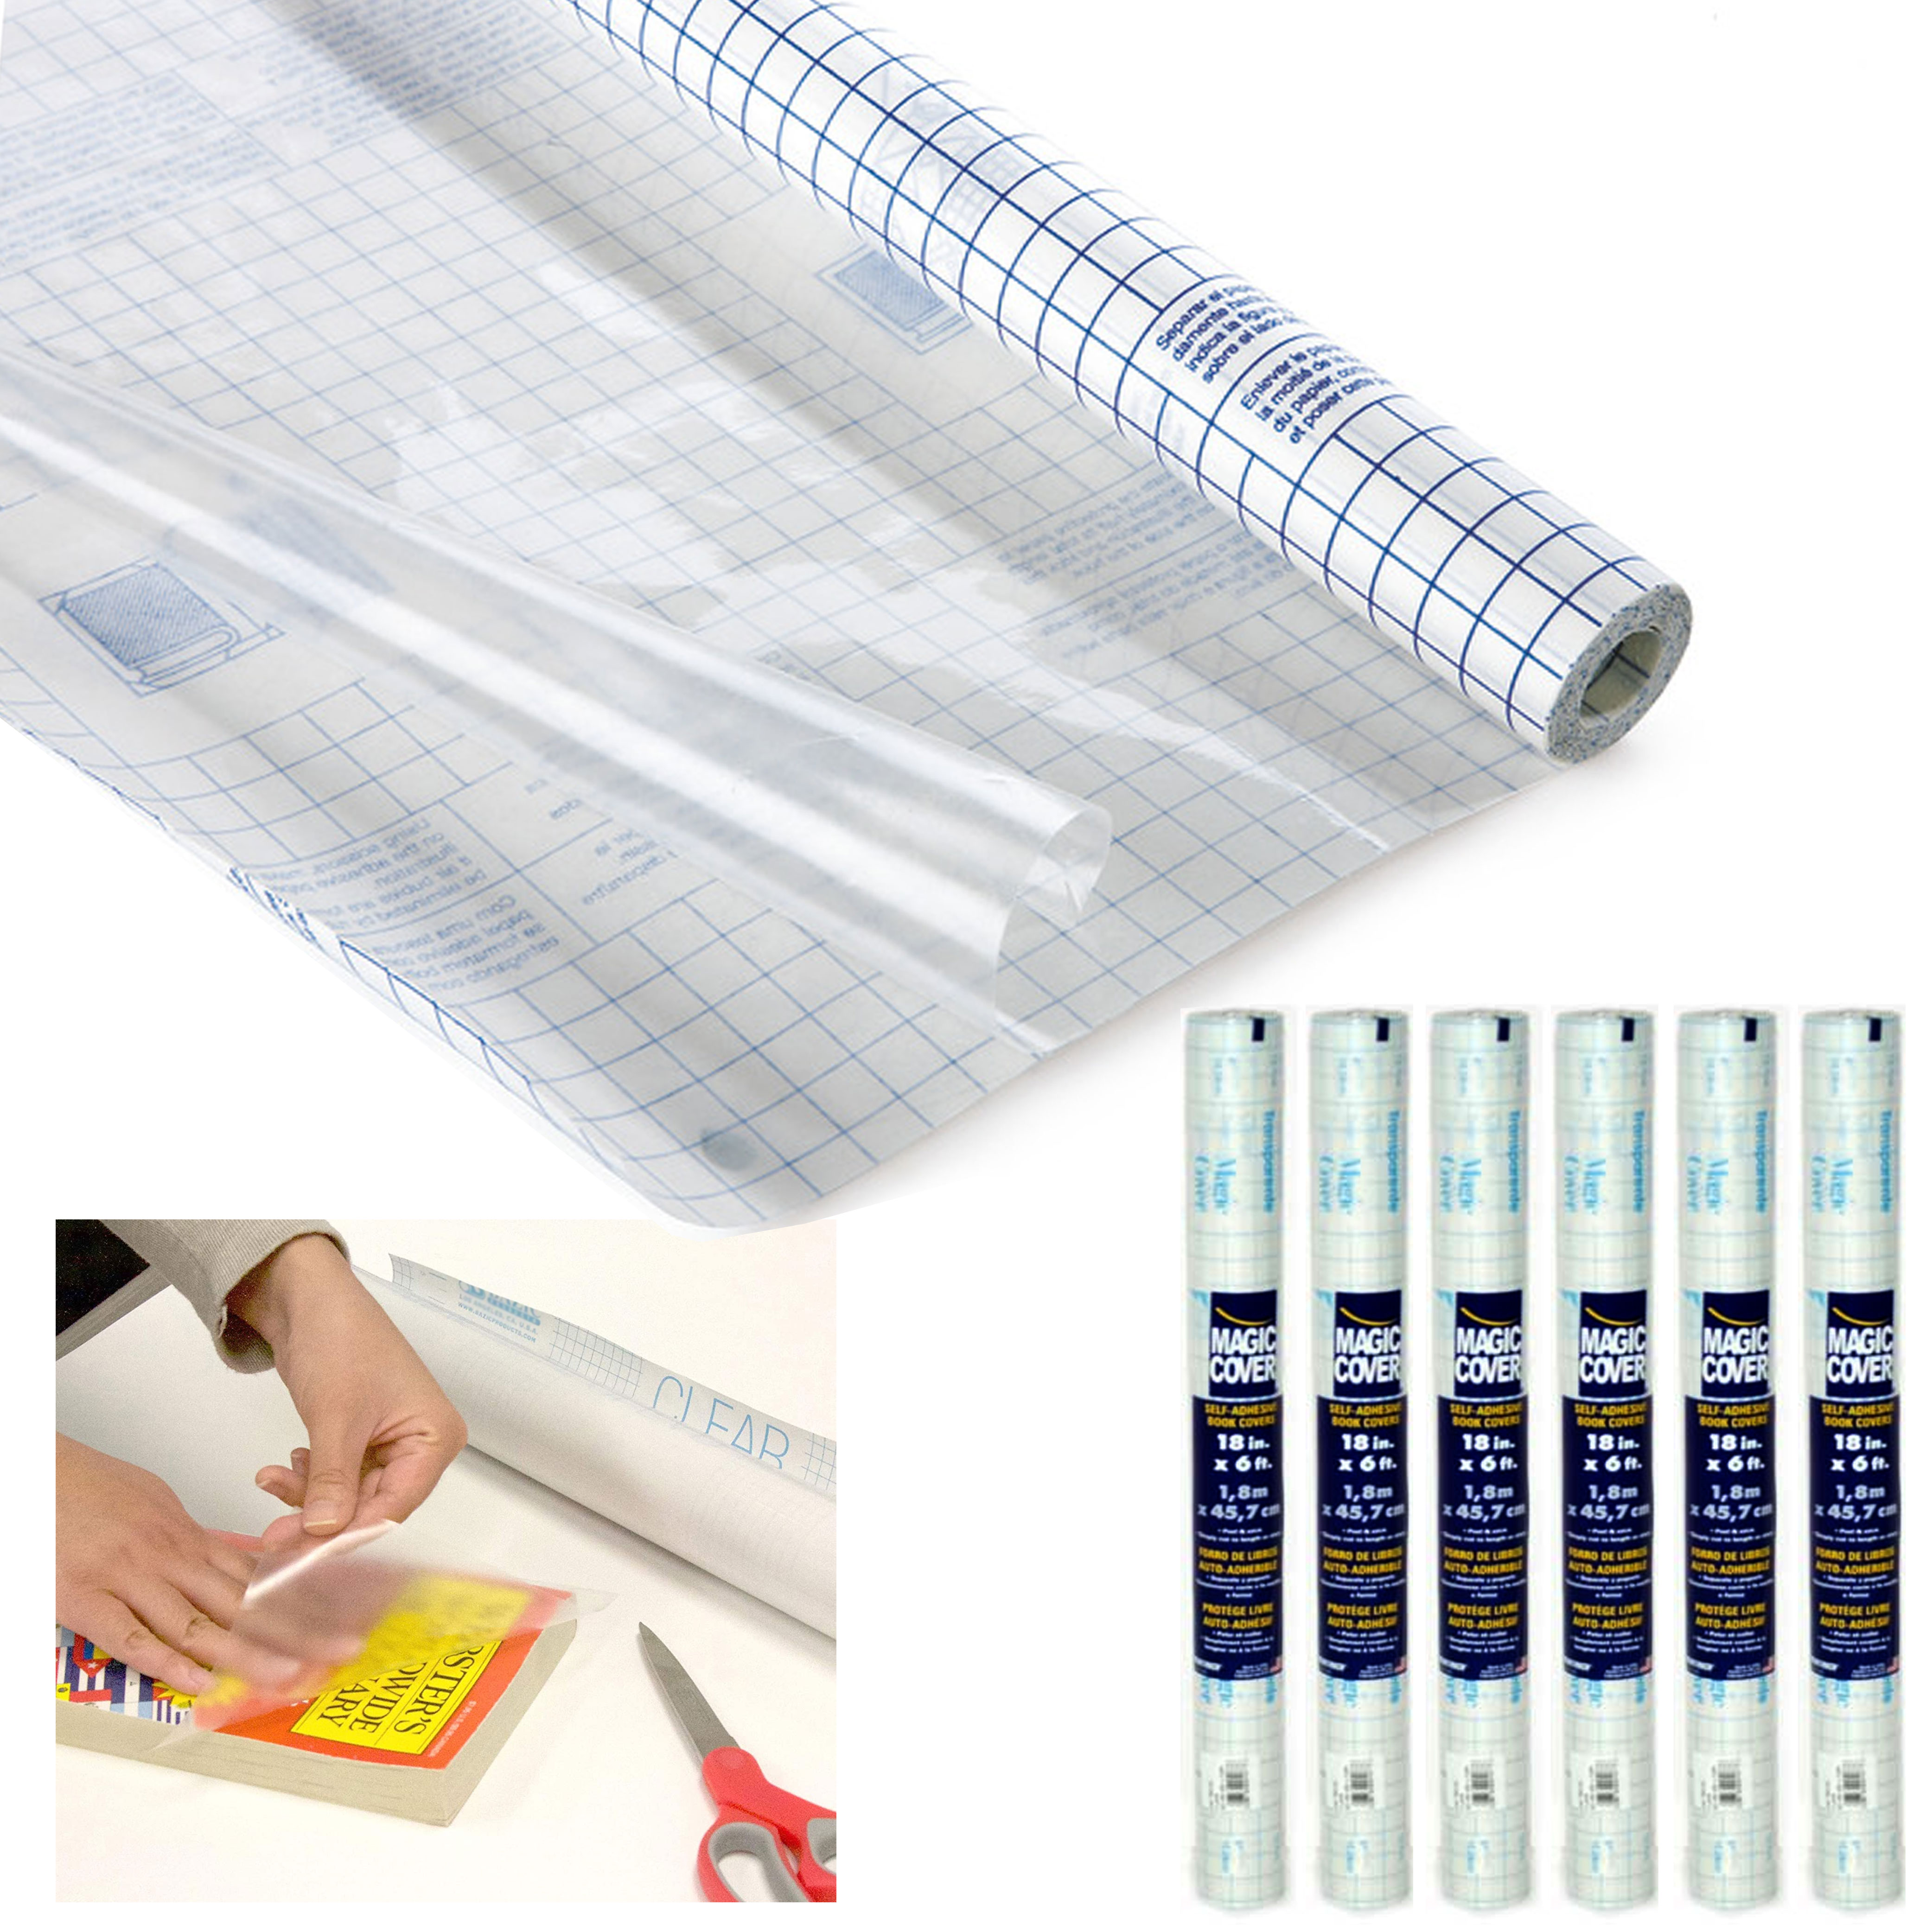 6 Rolls Clear Contact Paper Adhesive Self Stick Liner Film Cover Protect  18x6ft